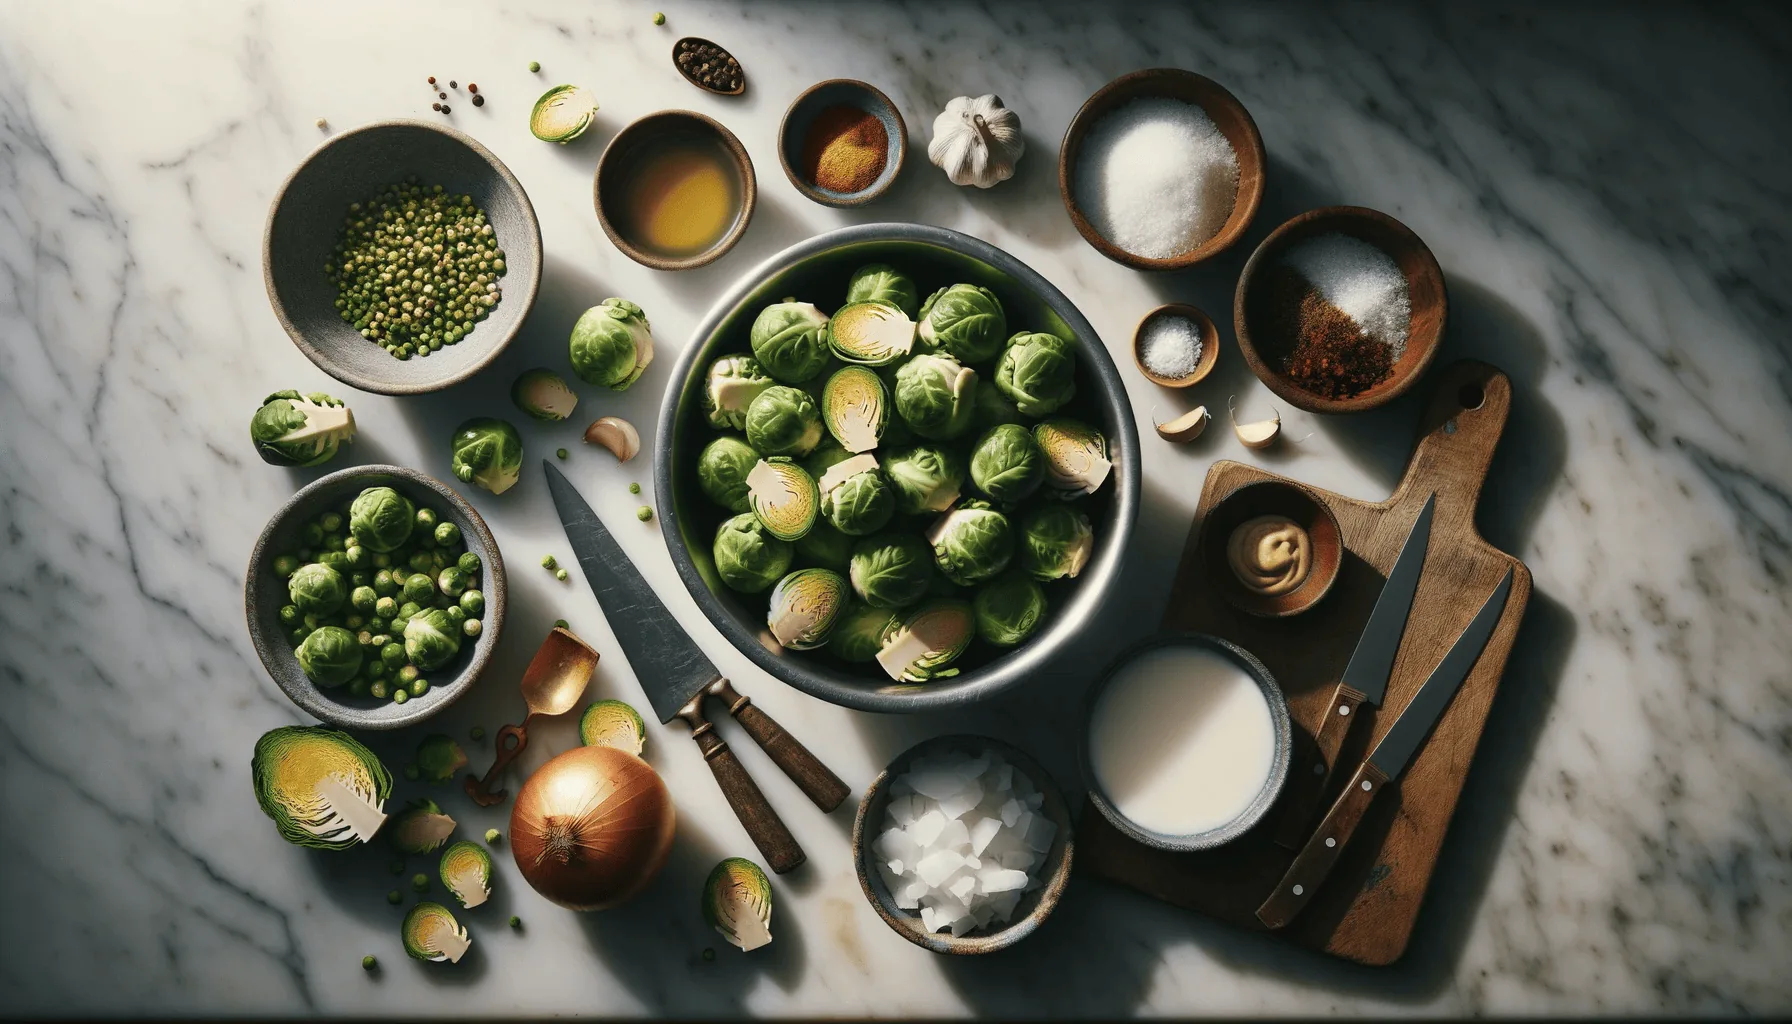 The ingredients for my vegan Brussel sprouts casserole recipe